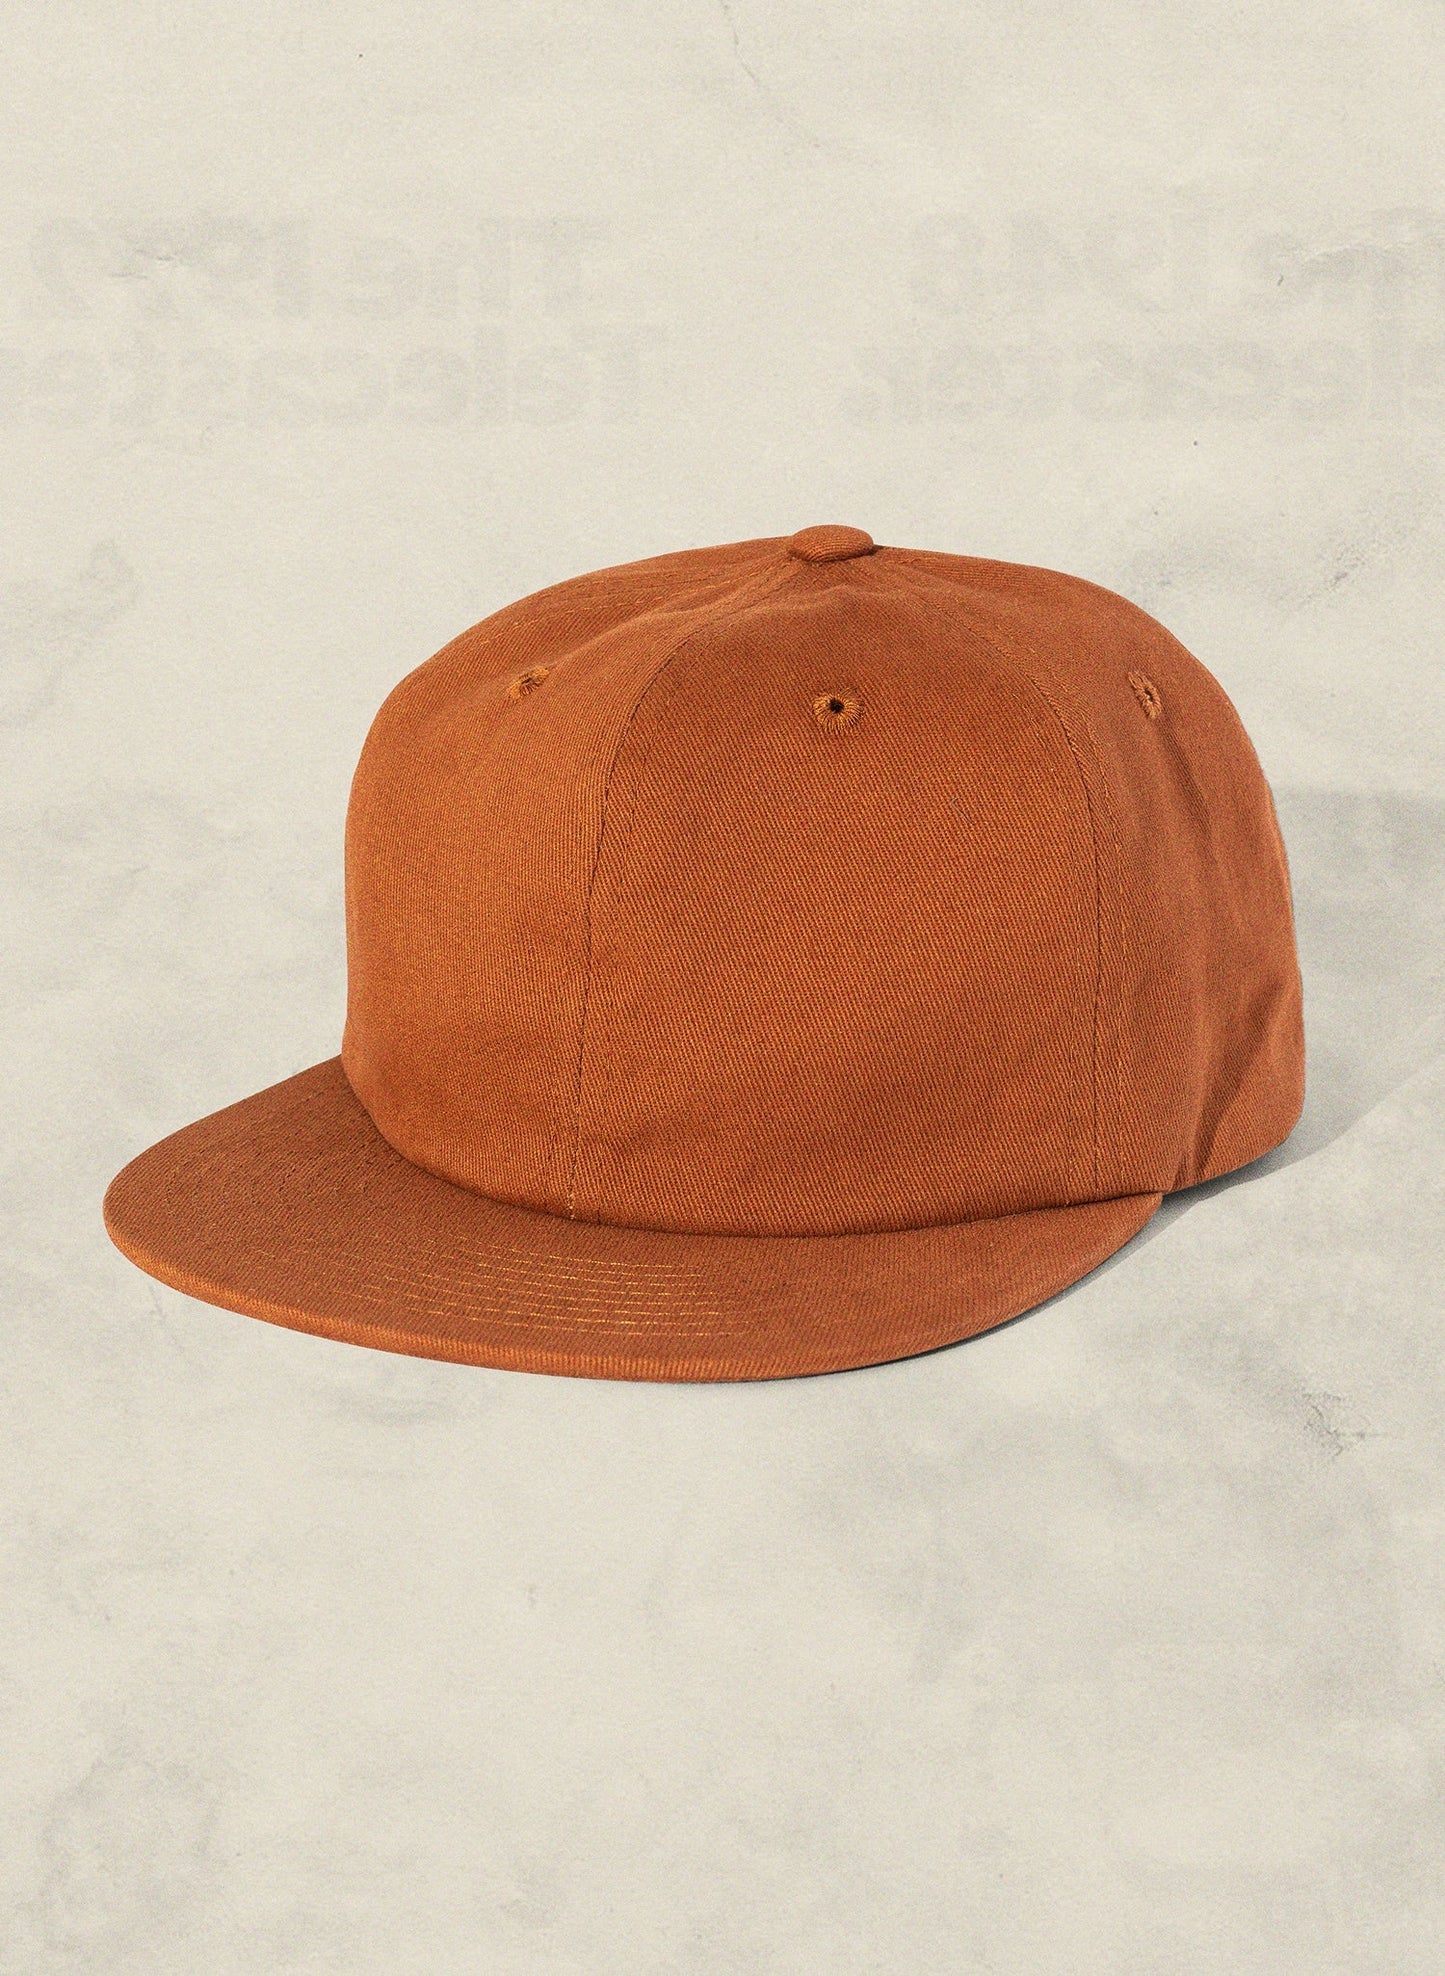 Weld Mfg Field Trip Hat - Unstructured 6 panel brushed cotton twill strapback hat, vintage inspired baseball hat, rust